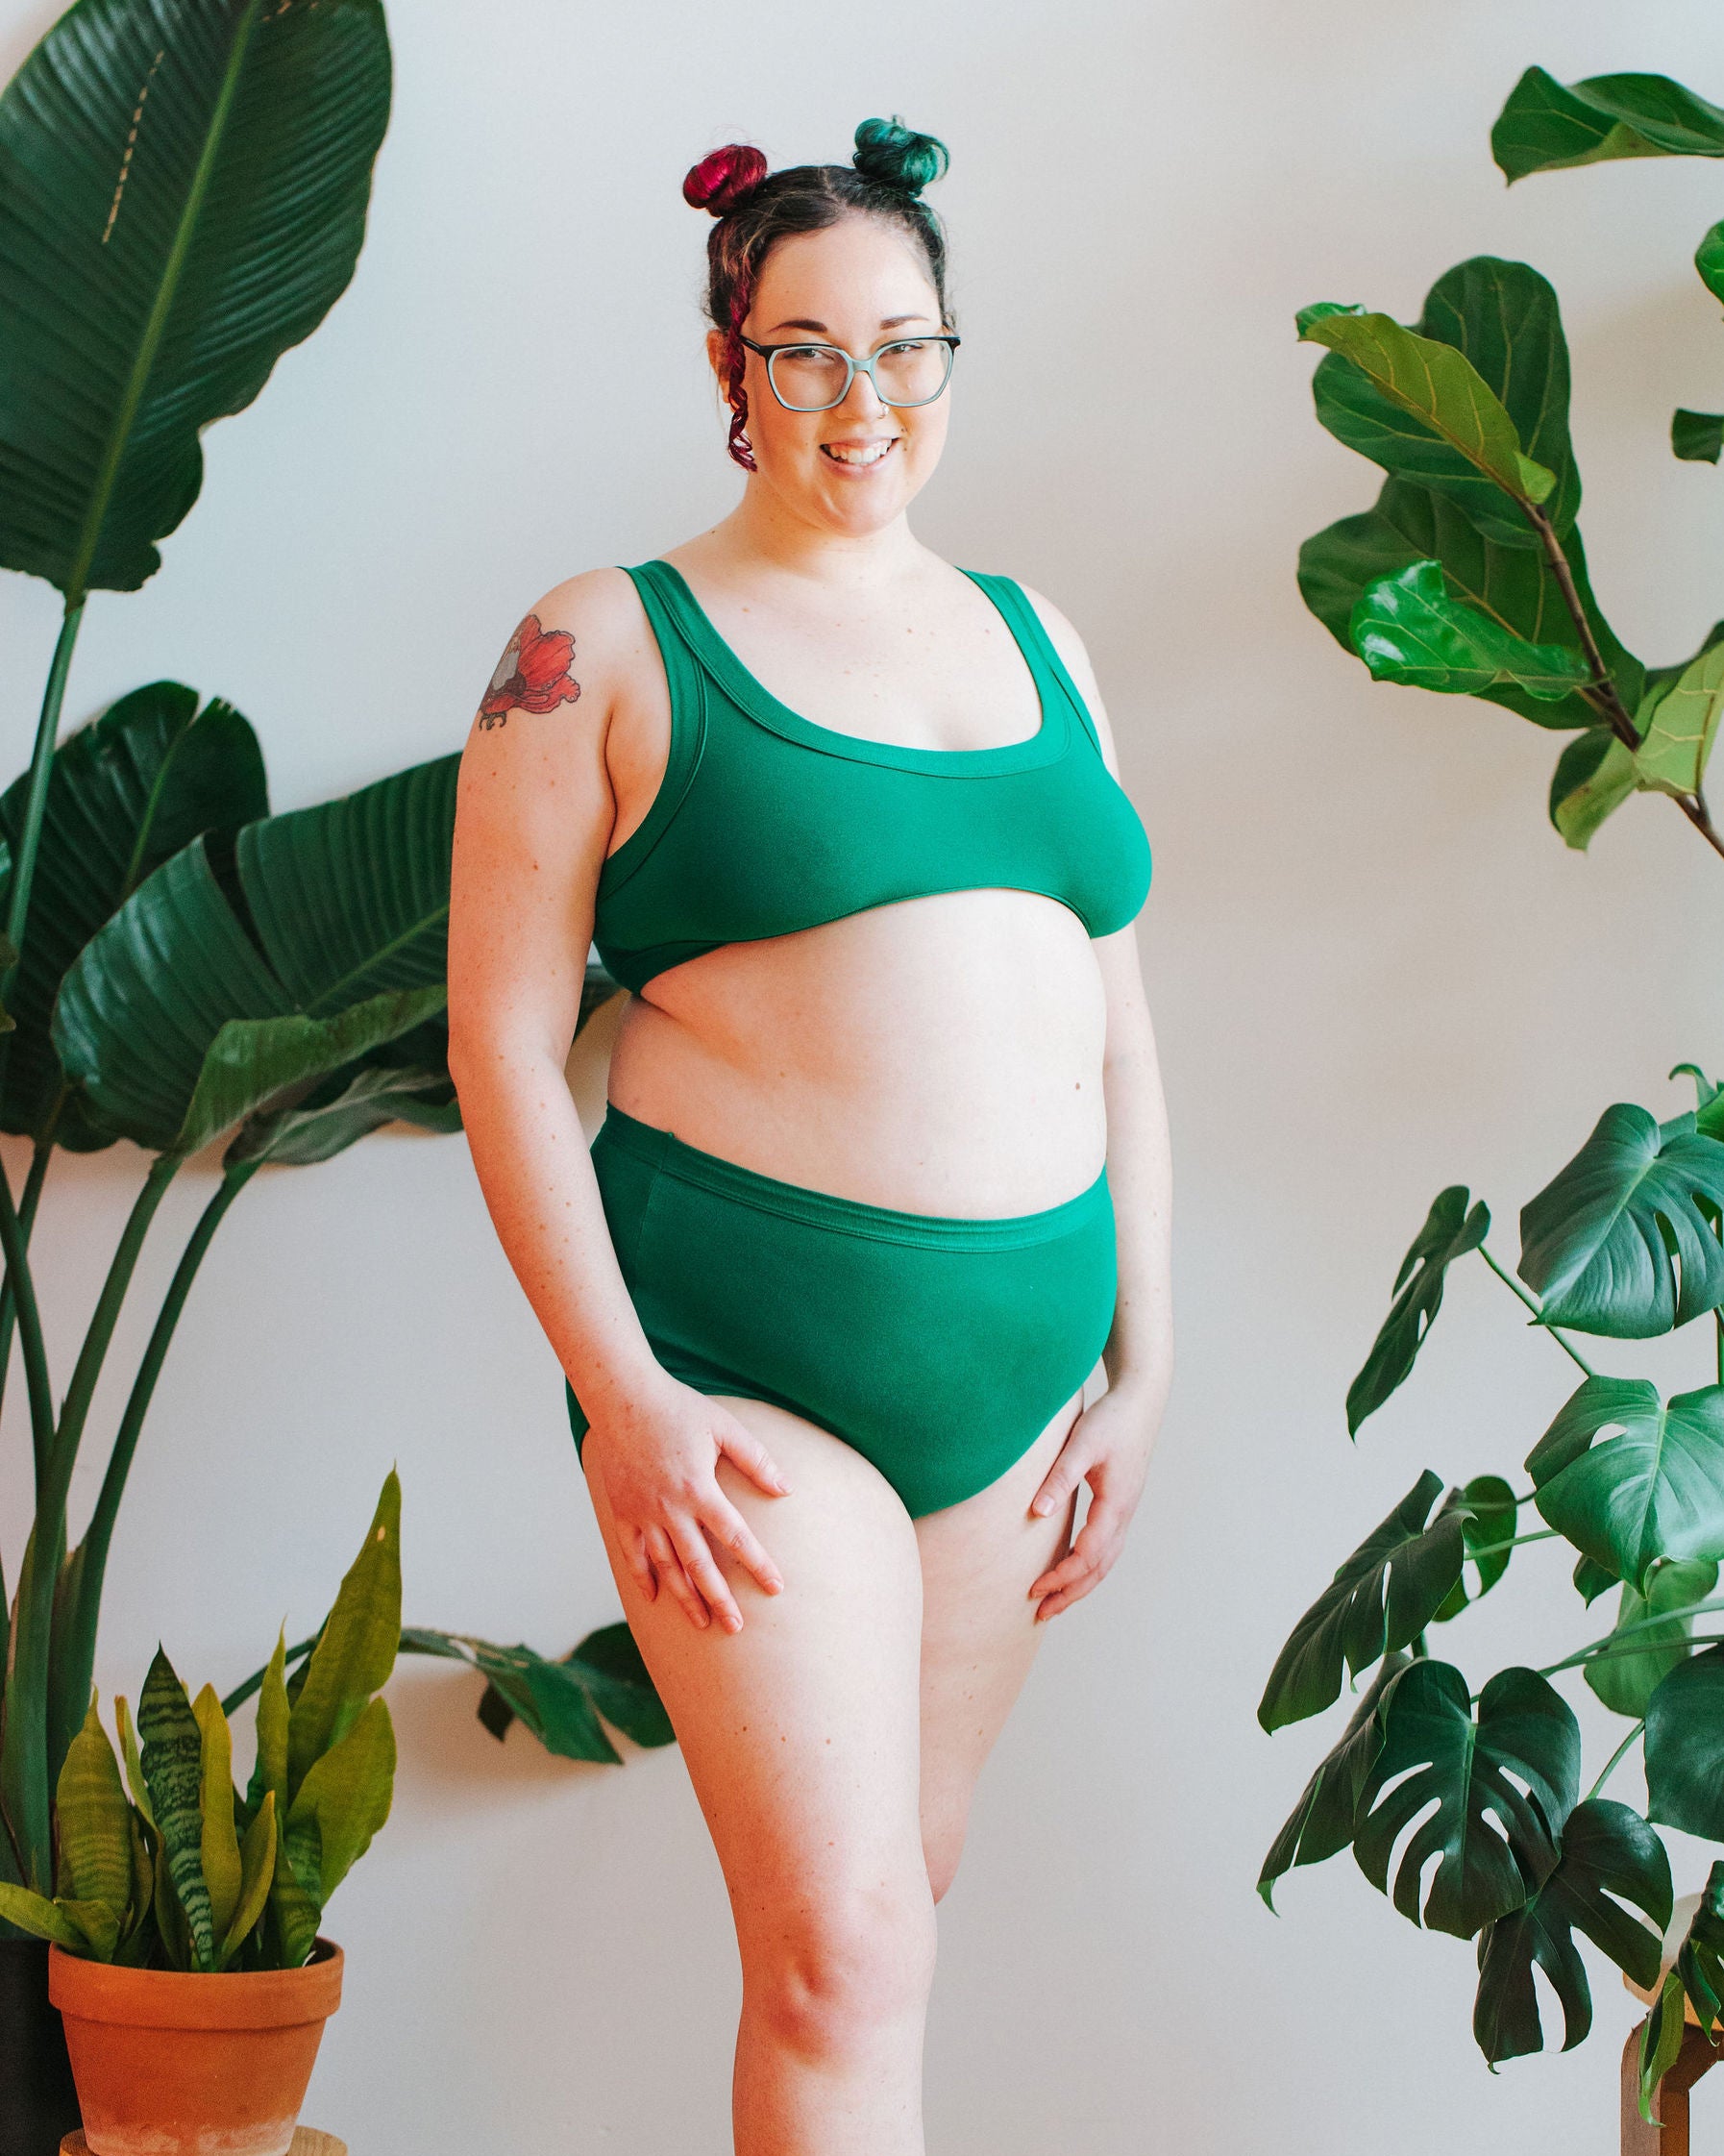 Model smiling in front of a bunch of plants wearing a Bralette and Original style underwear in Emerald Green.